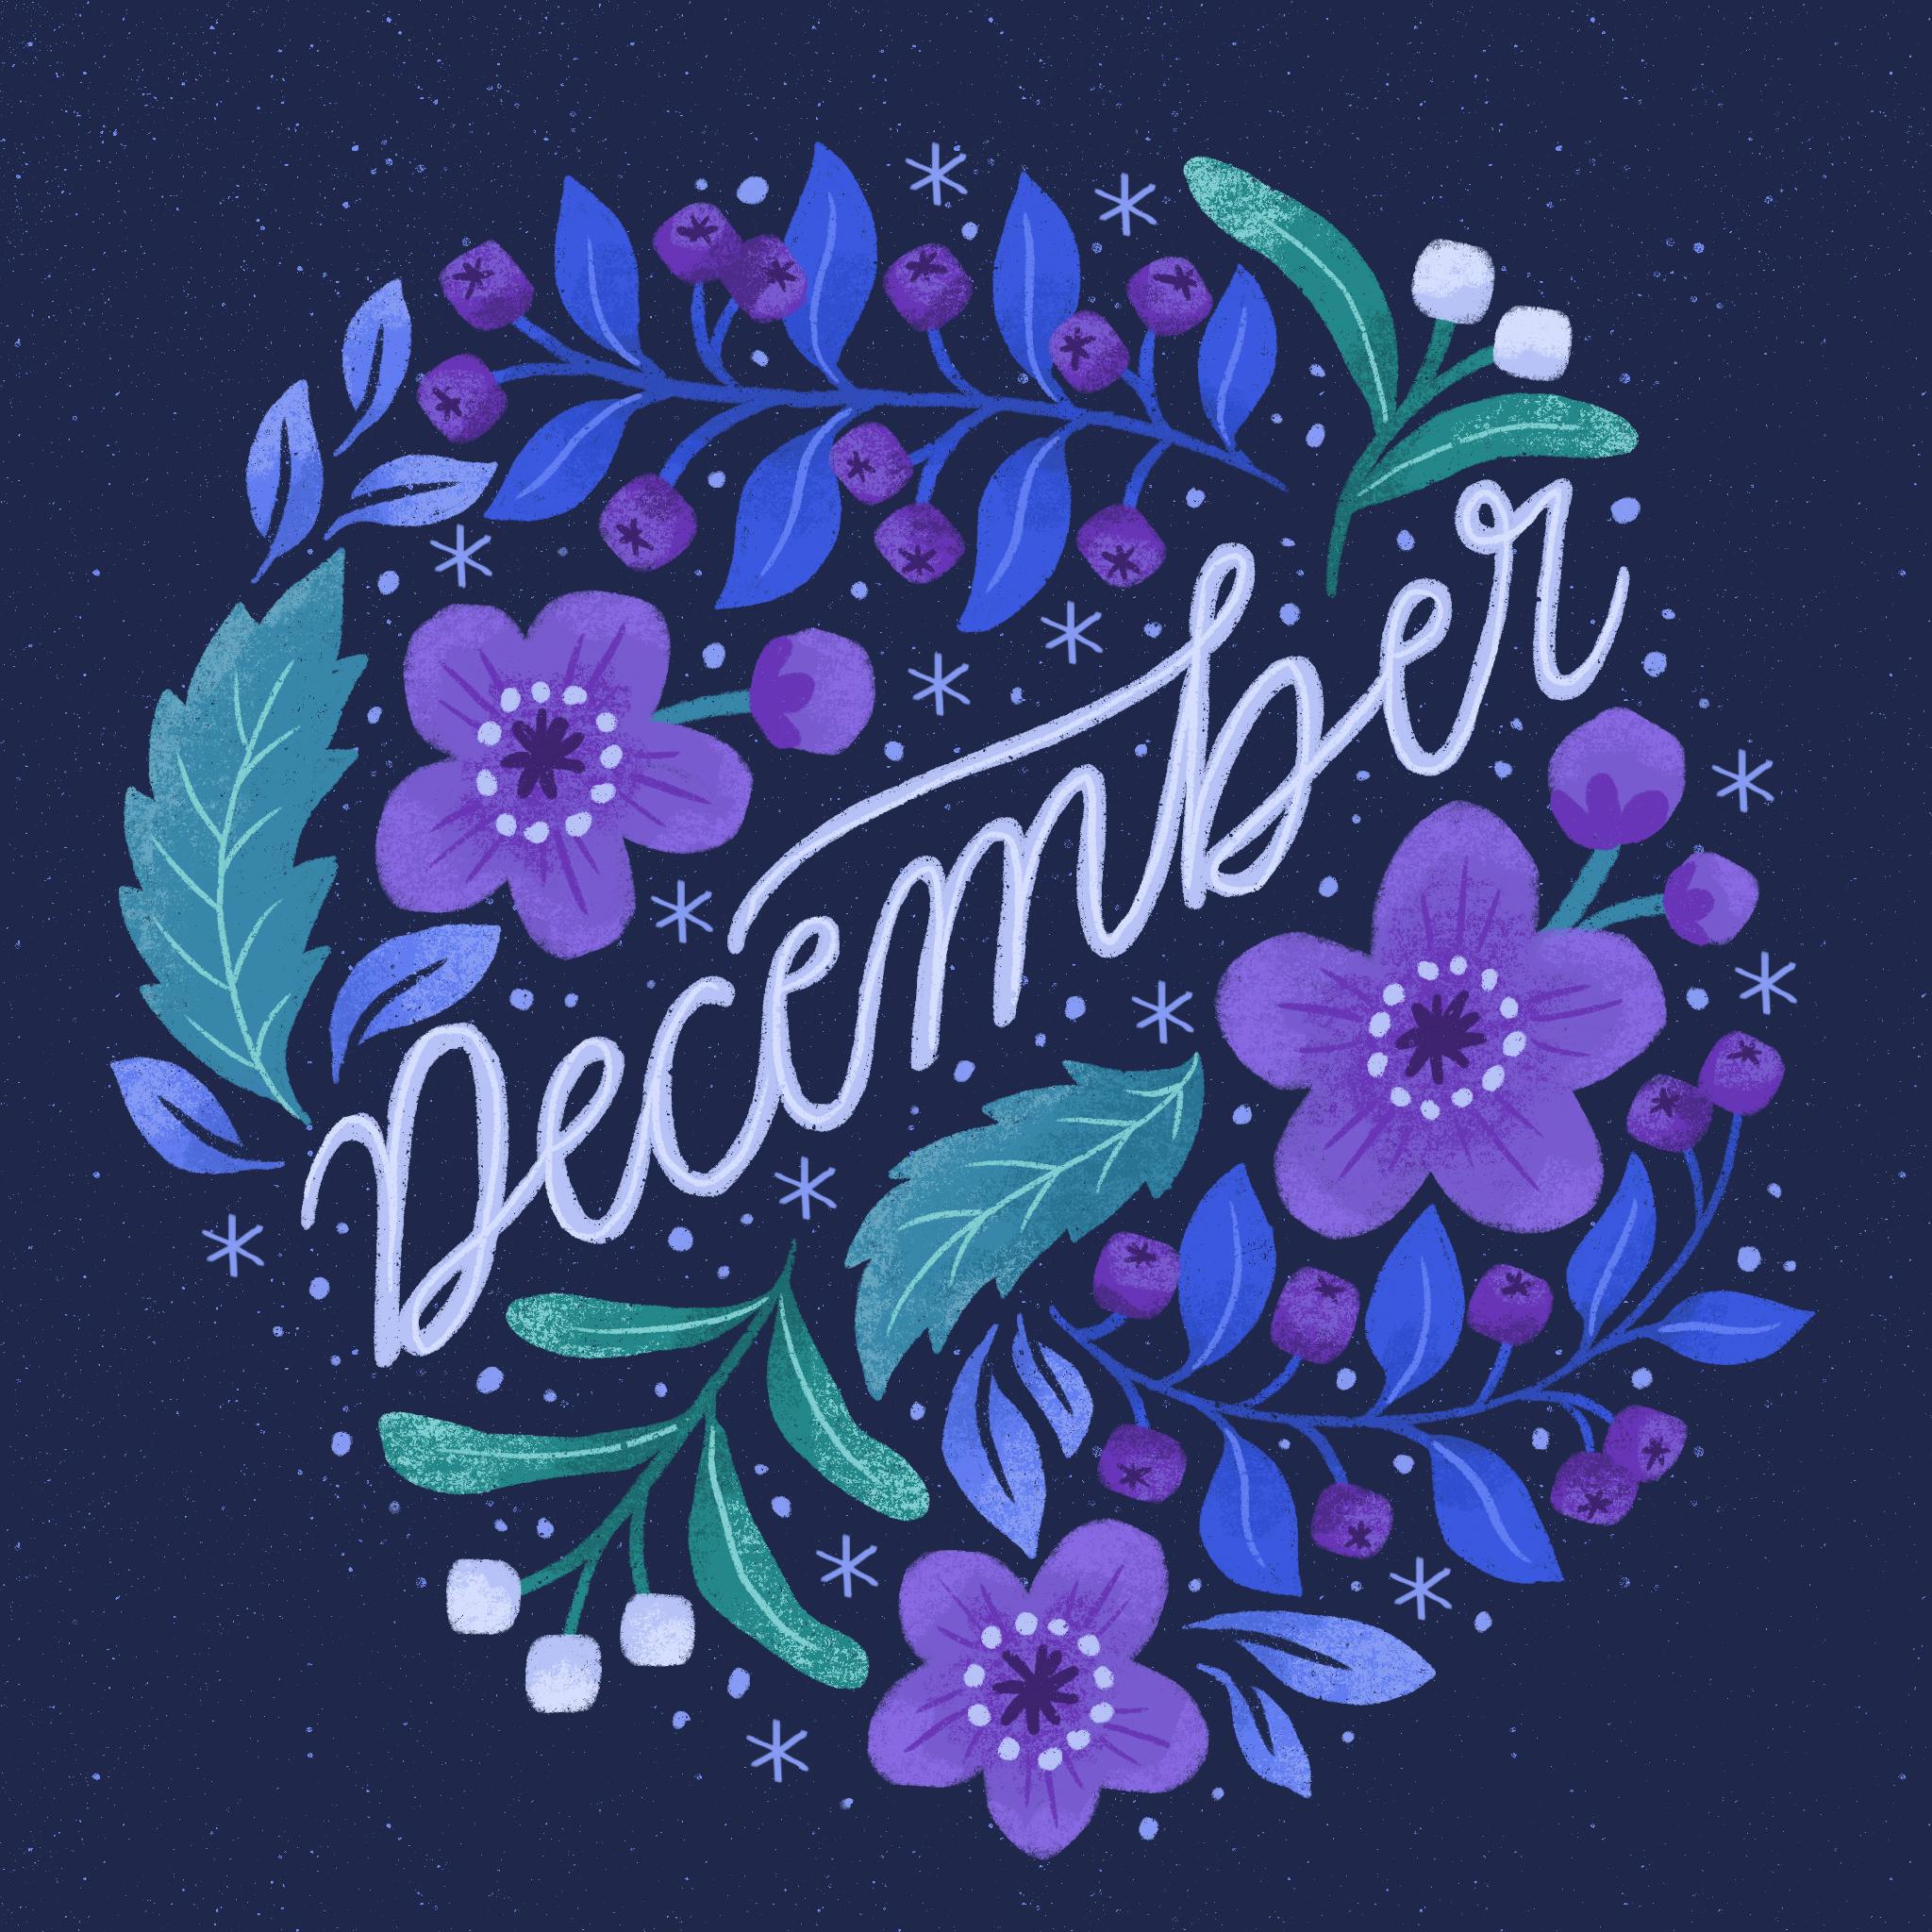 "December" surrounded by illustrated purple flowers